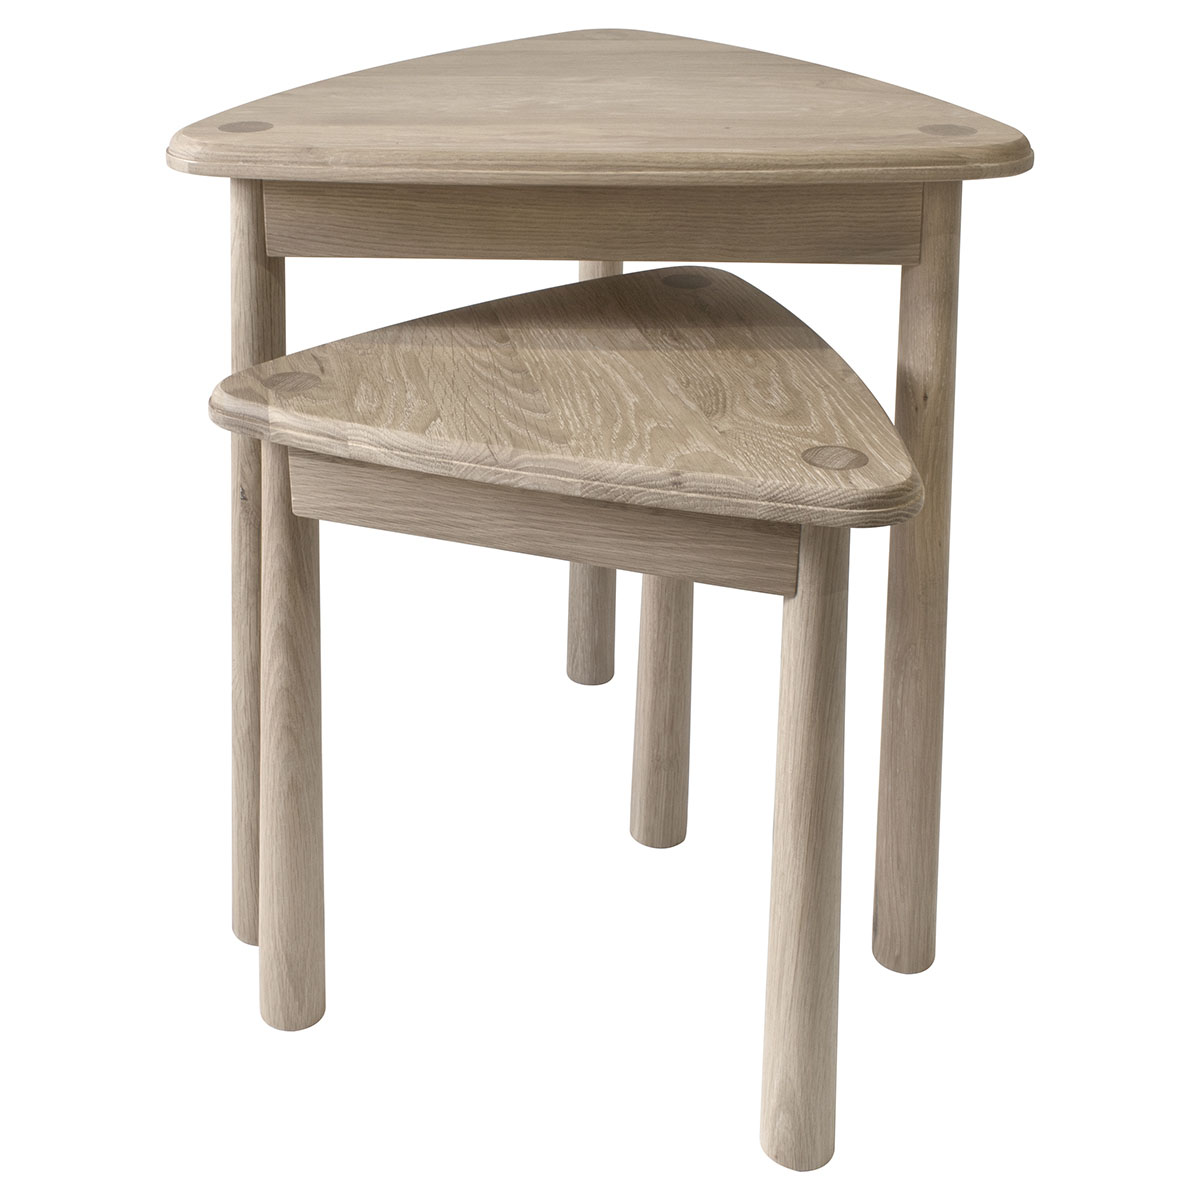 Wycombe Nest of 2 Tables 500x500x590mm